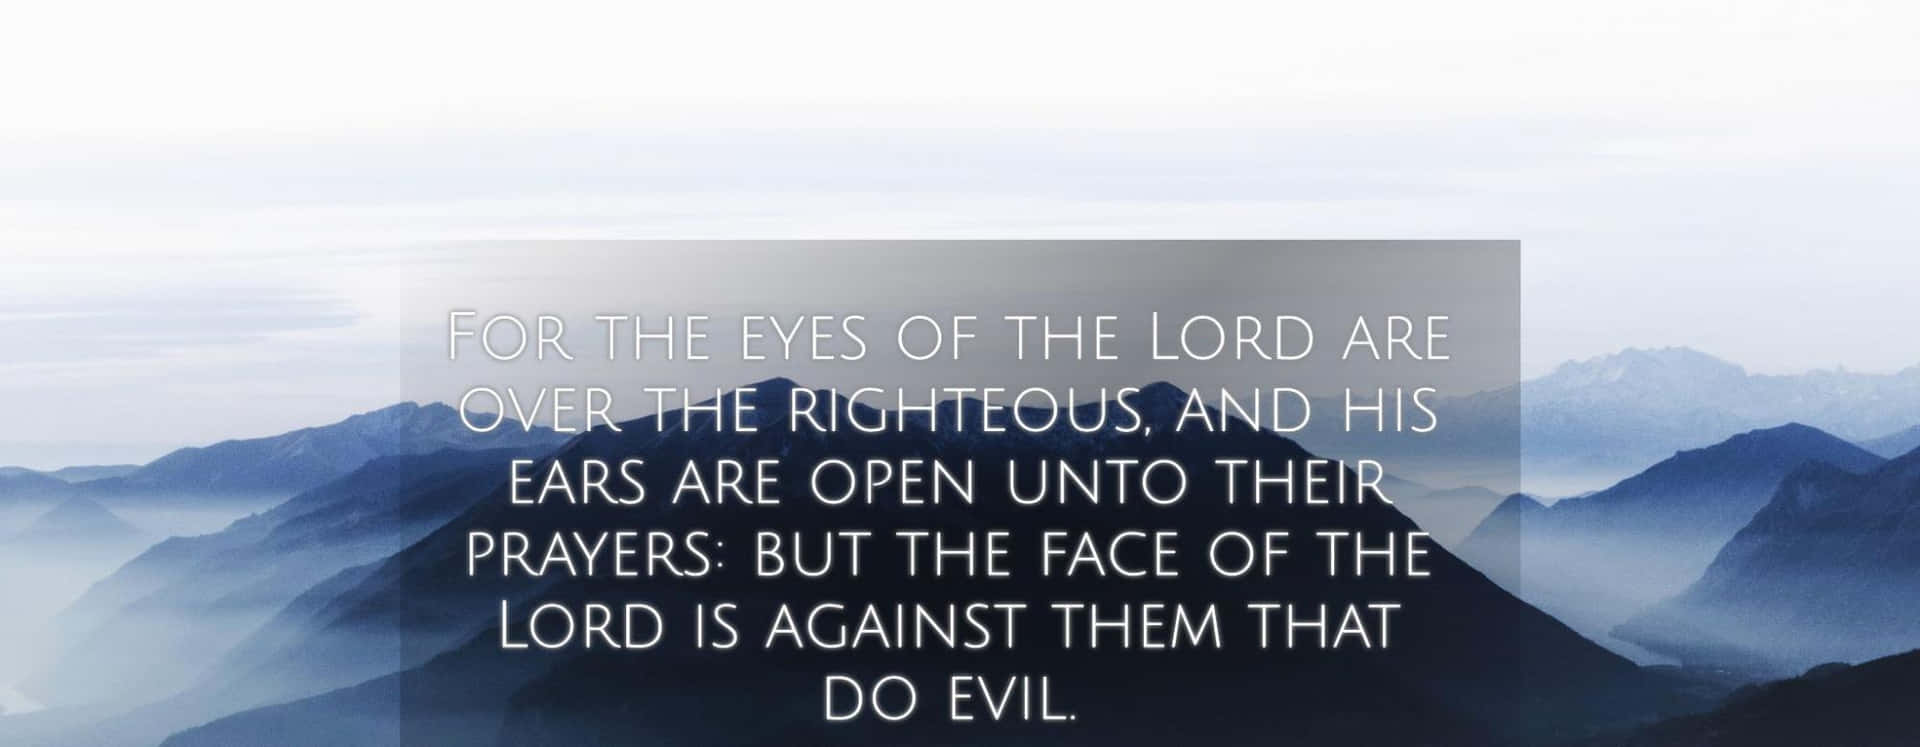 Righteous Eyes Of The Lord Quote Wallpaper